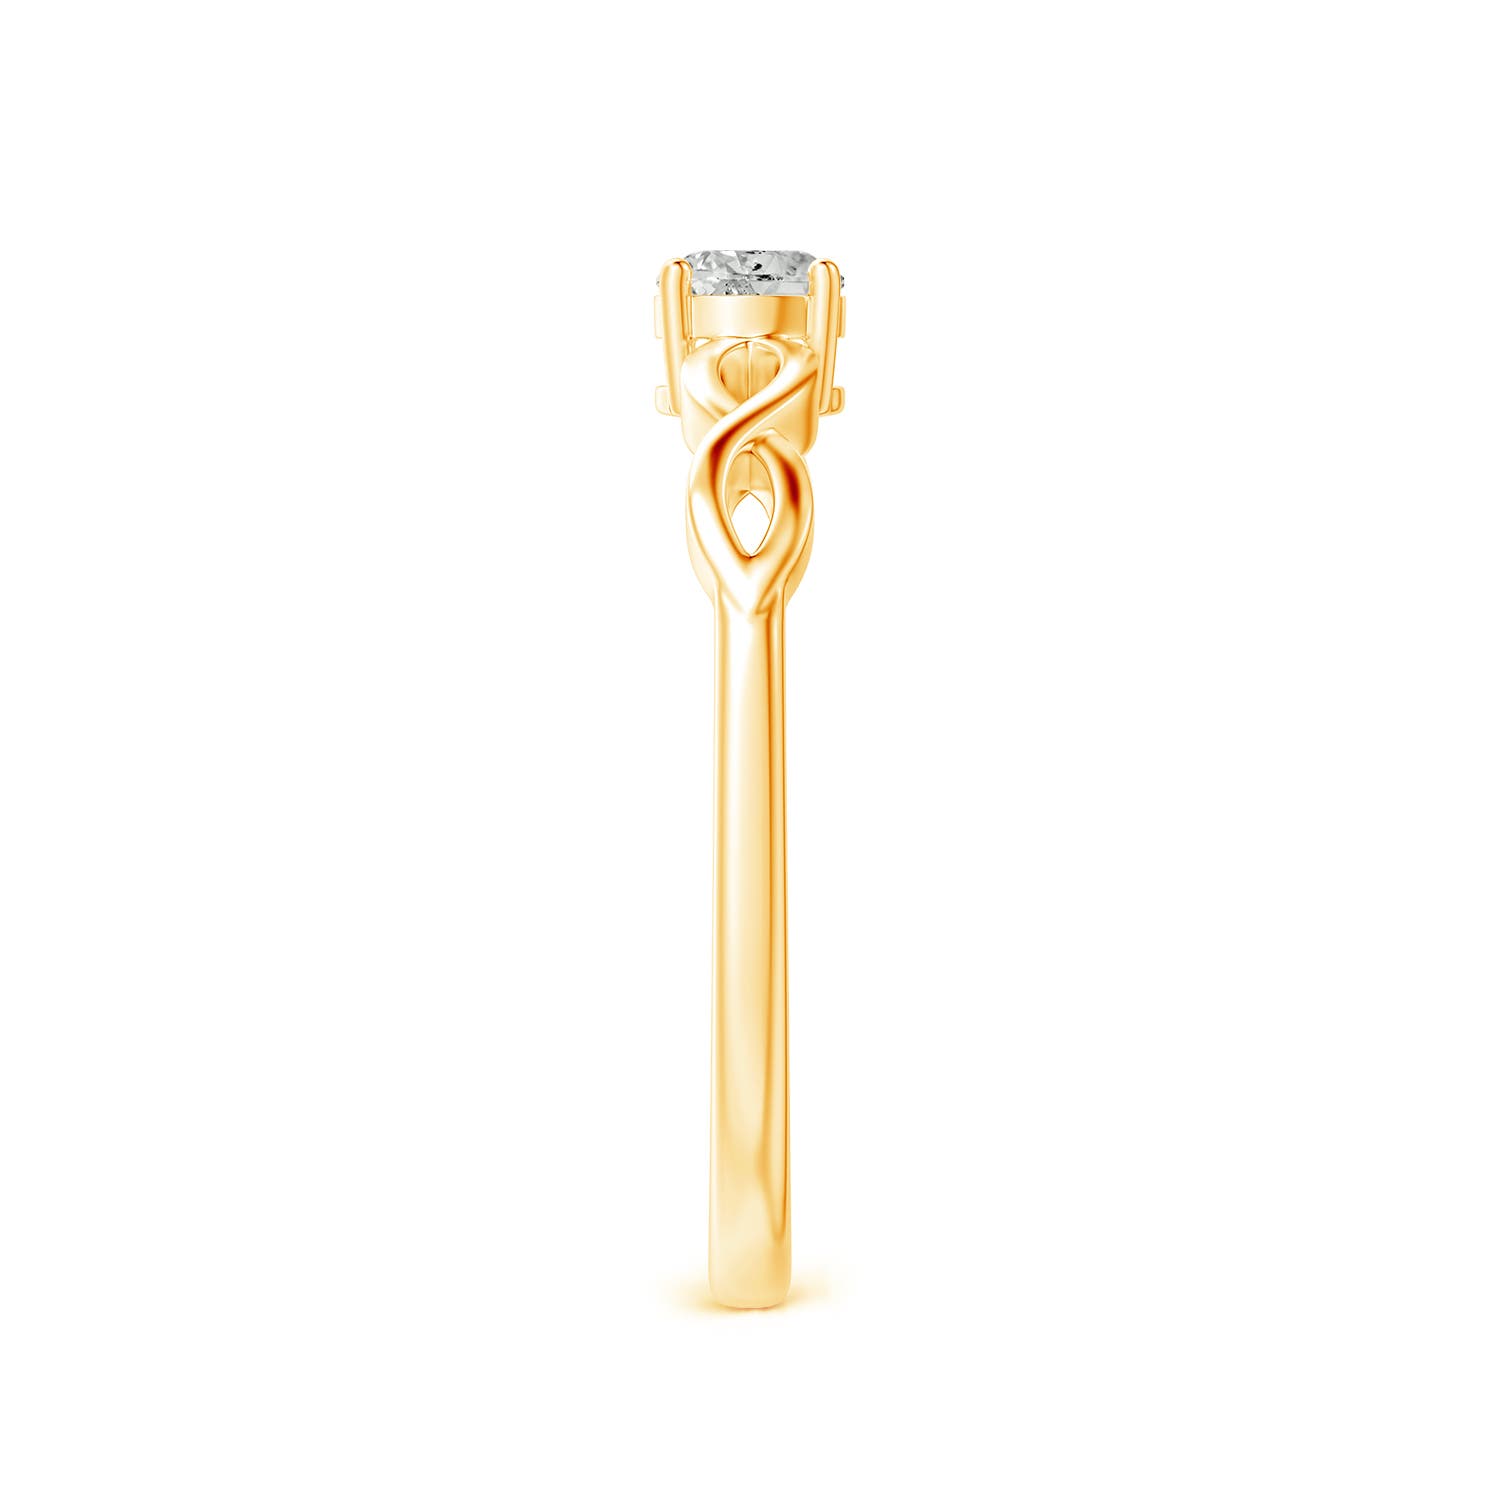 K, I3 / 0.23 CT / 14 KT Yellow Gold